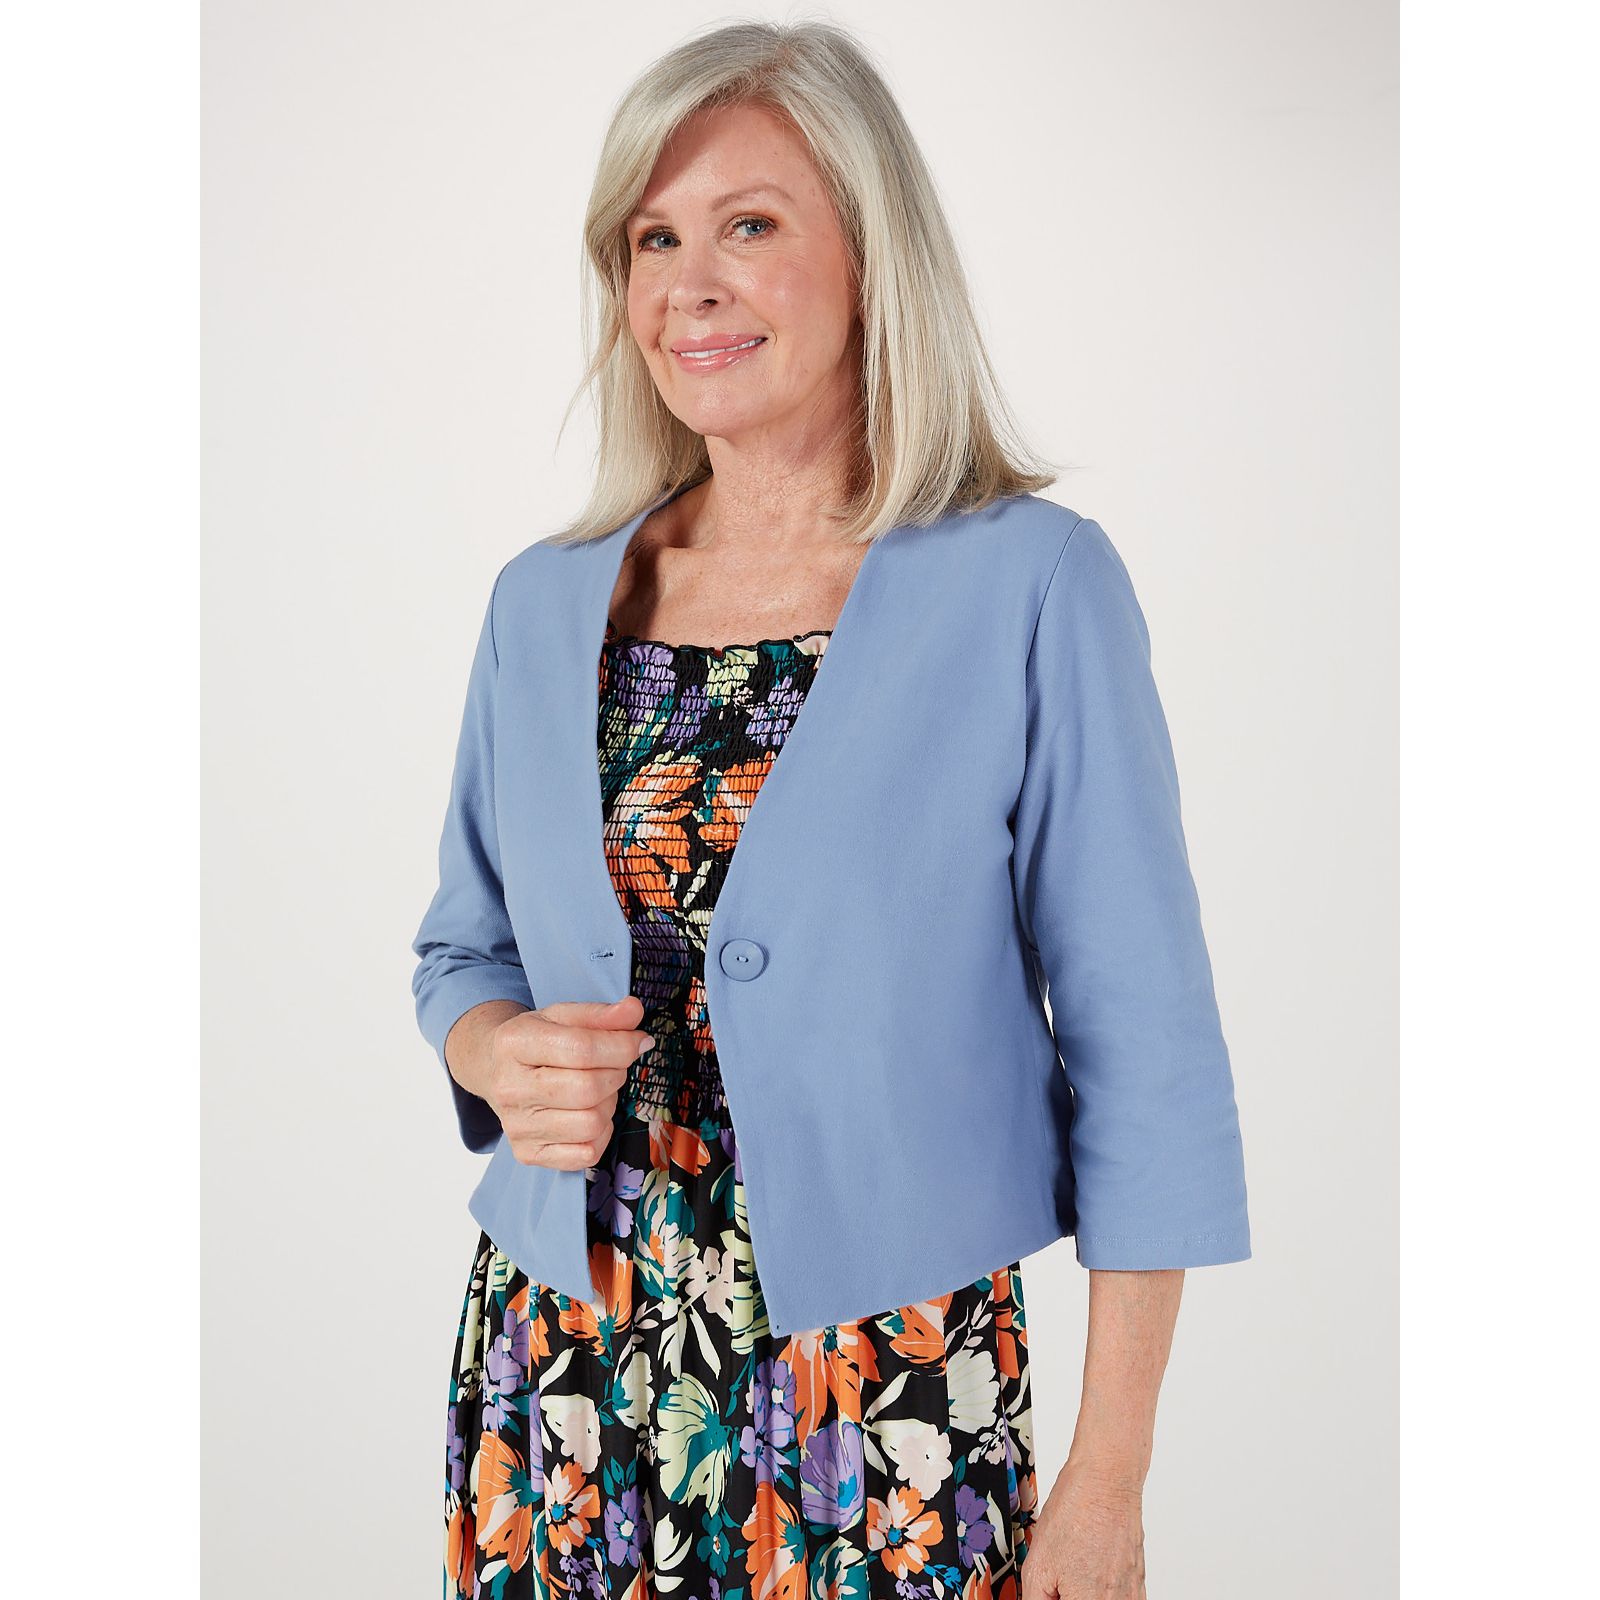 DENIM & CO QVC Linen Blend Stretch Jacket New With Tags £29.99 - PicClick UK